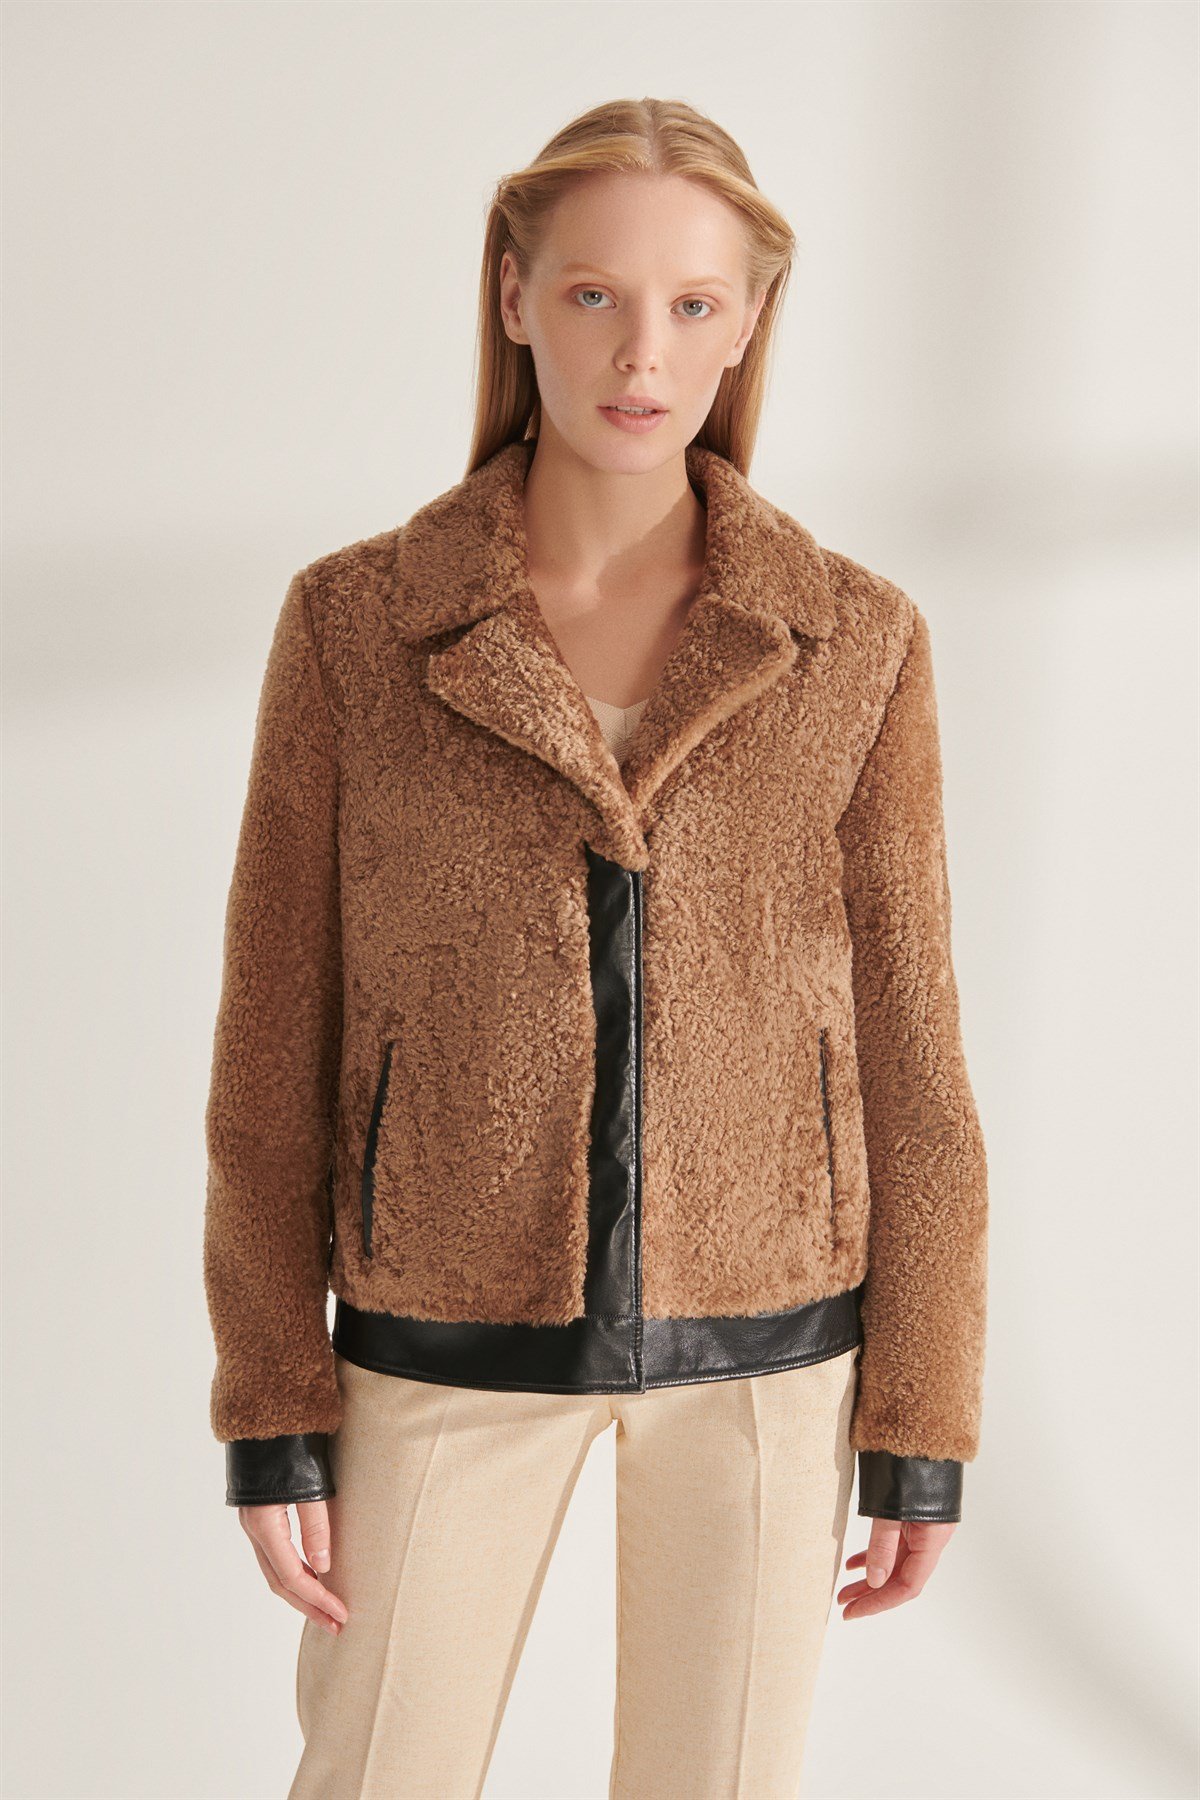 AVA Women's Brown Shearling Leather Jacket | Women's Shearling Leather  Jacket Models